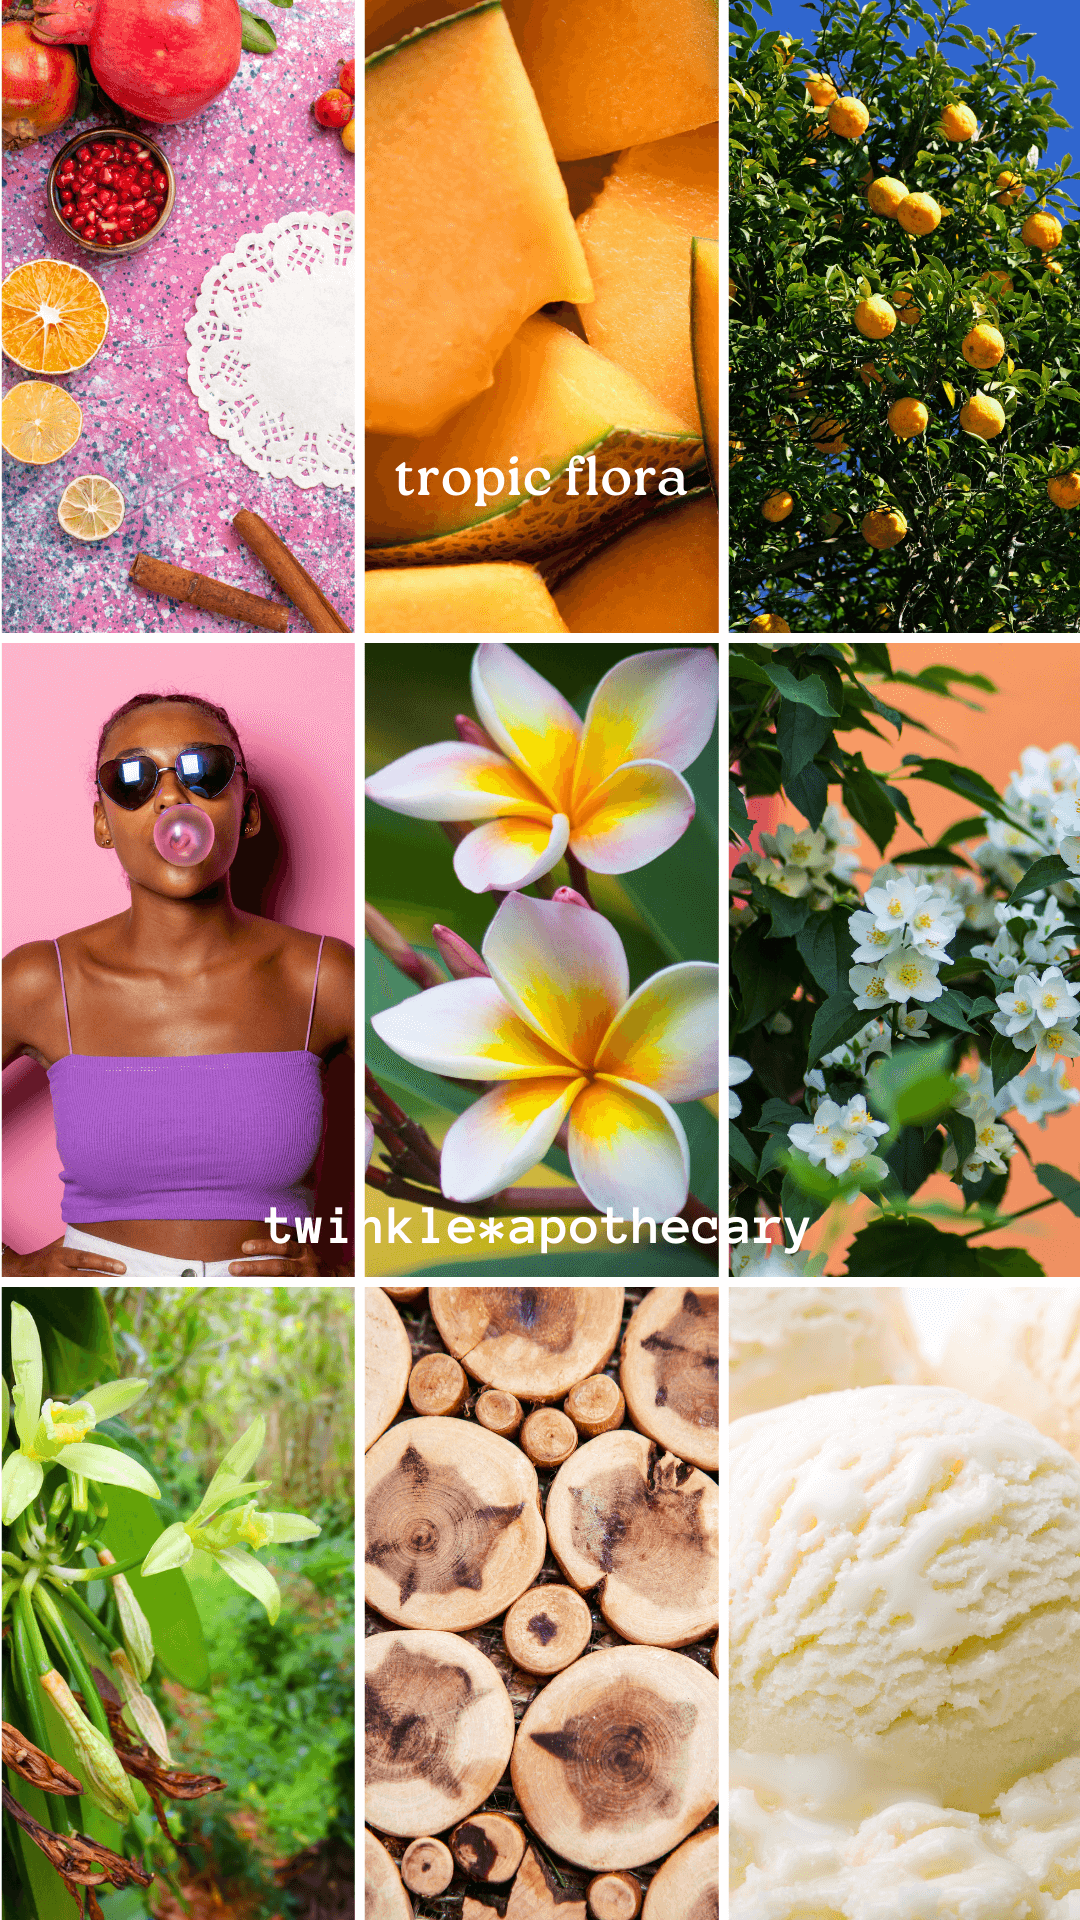 Tropic Flora: stand-alone fragrance